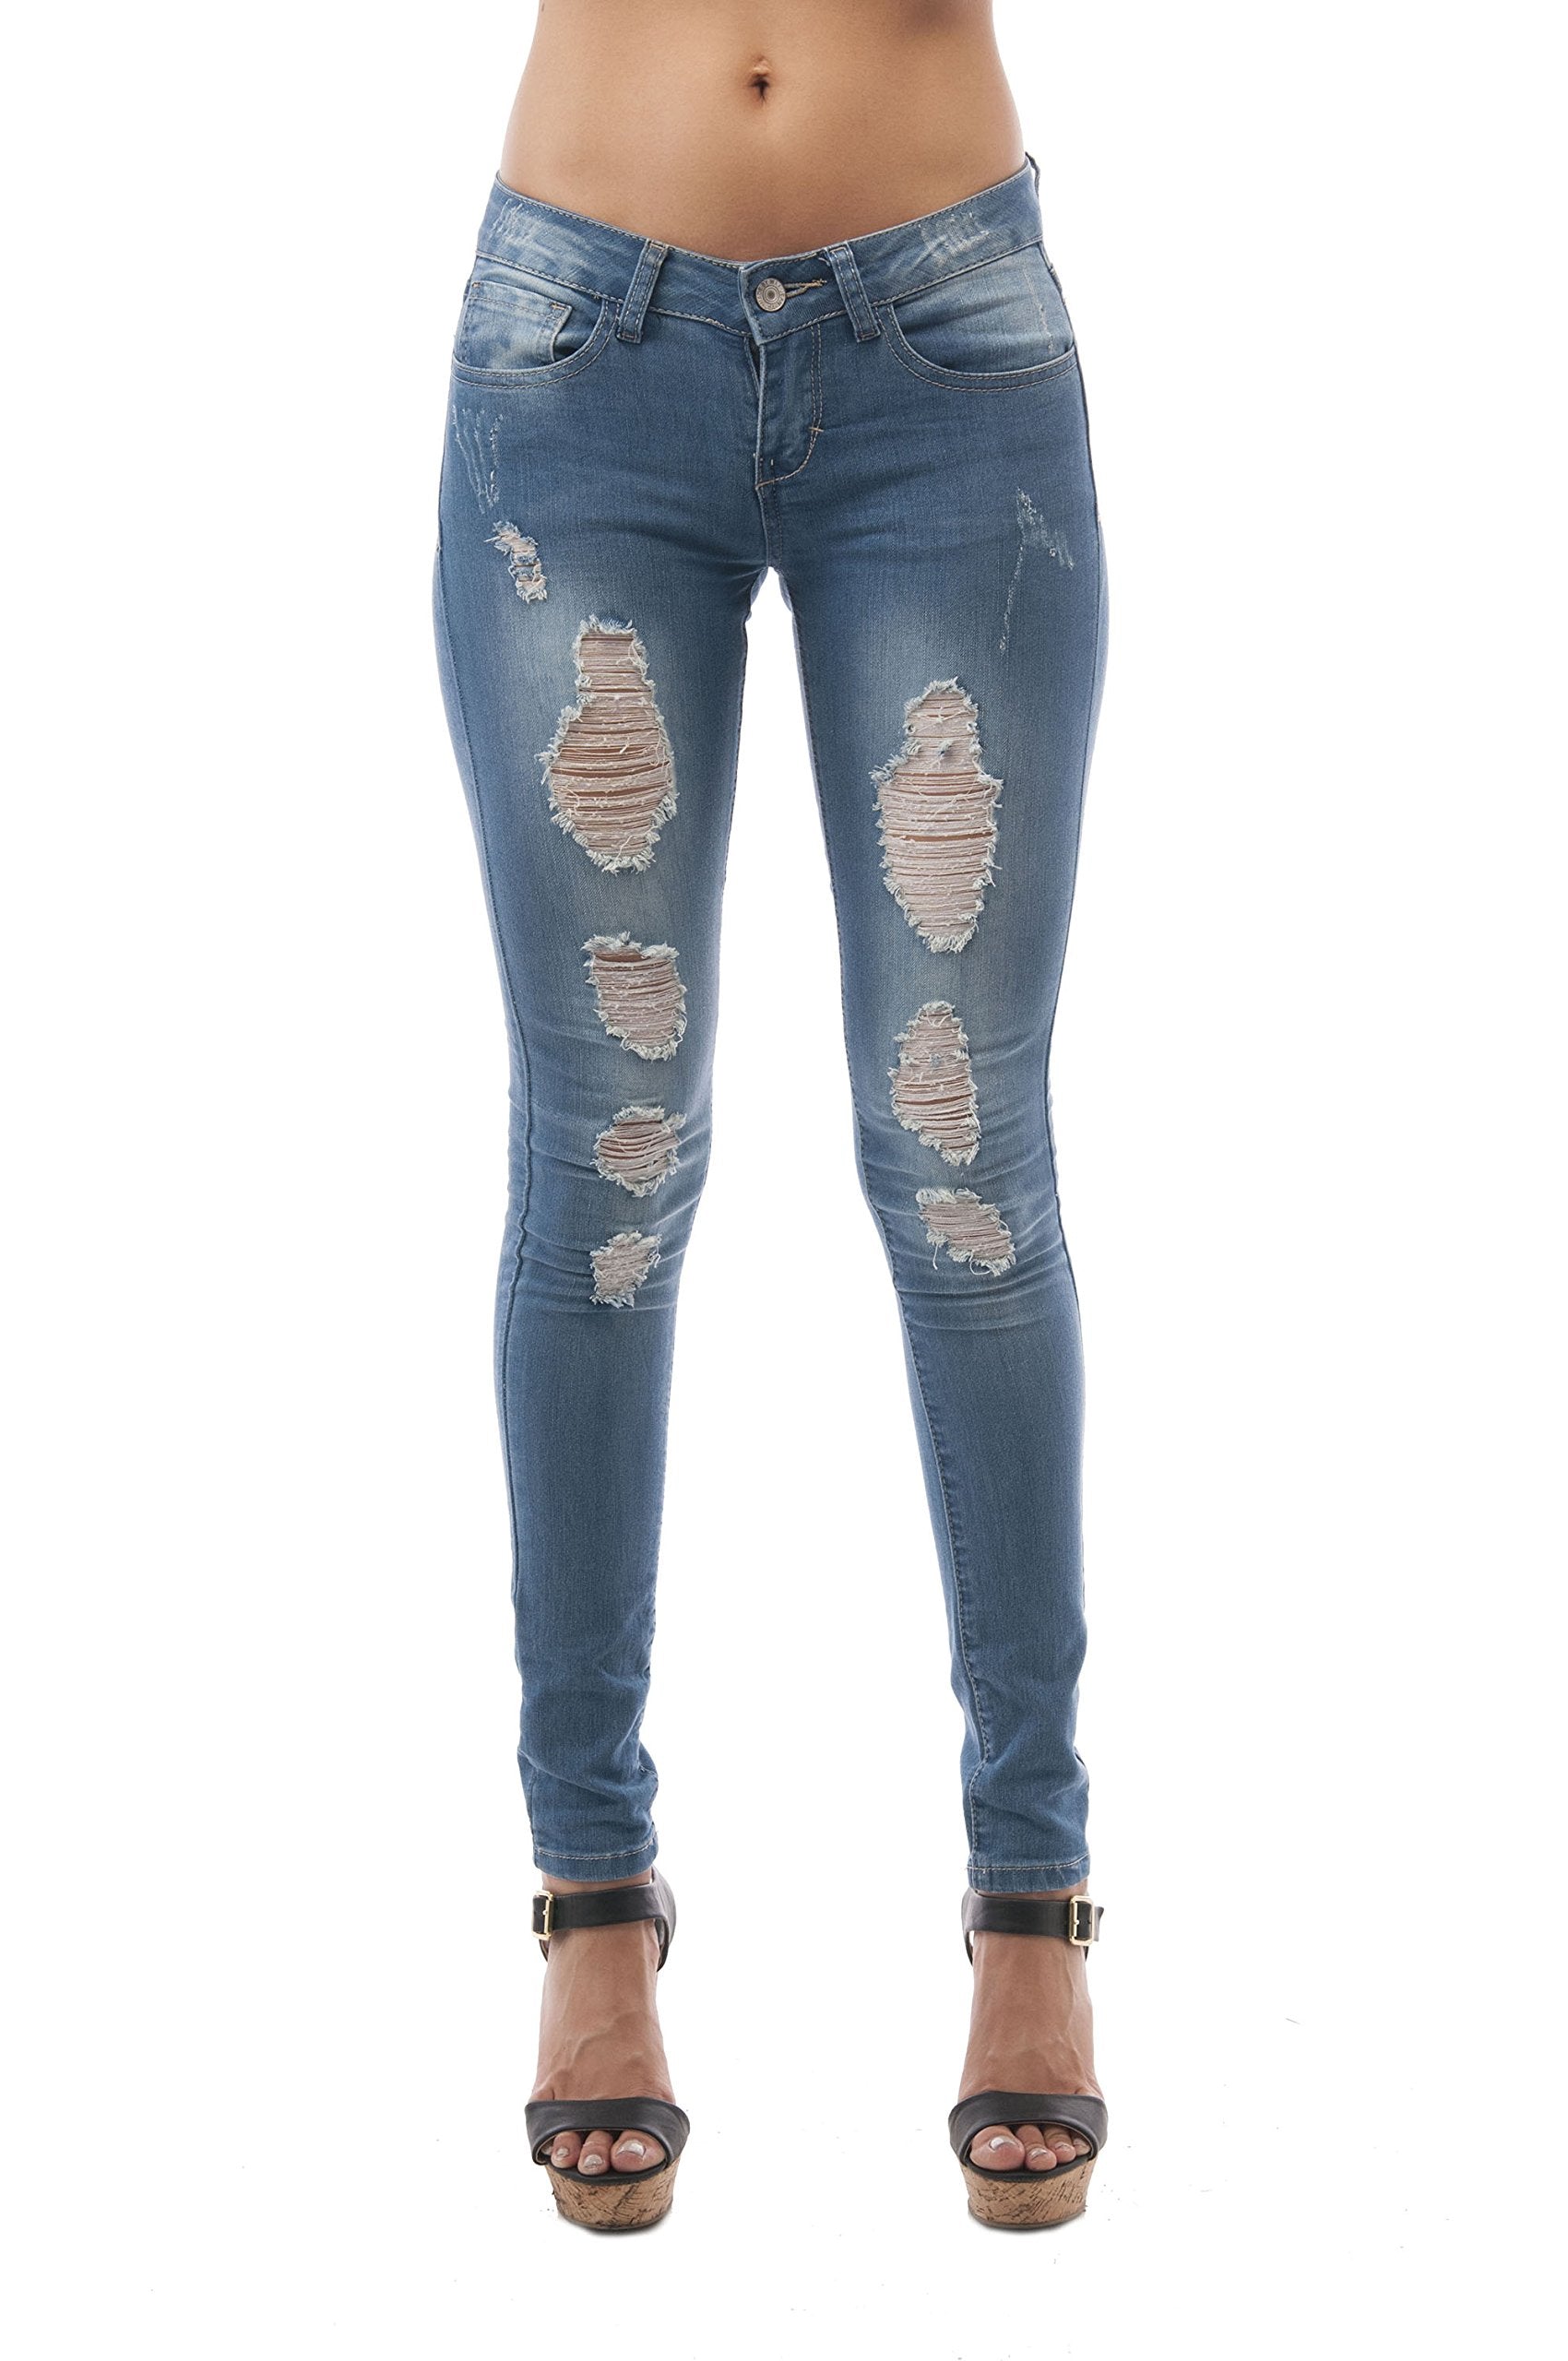 Hollywood Star Fashion Ripped Distressed Skinny Jeans